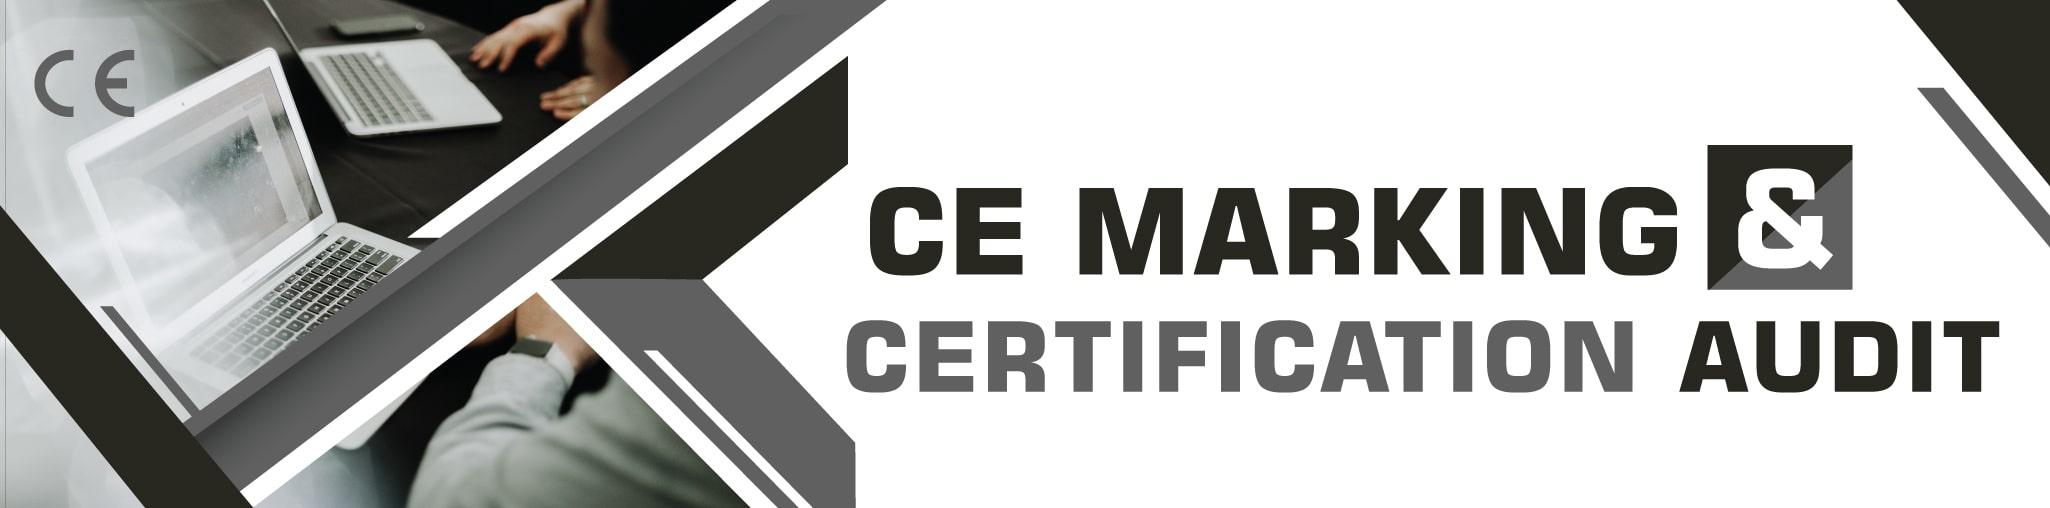 CE Marking and Certification Audit